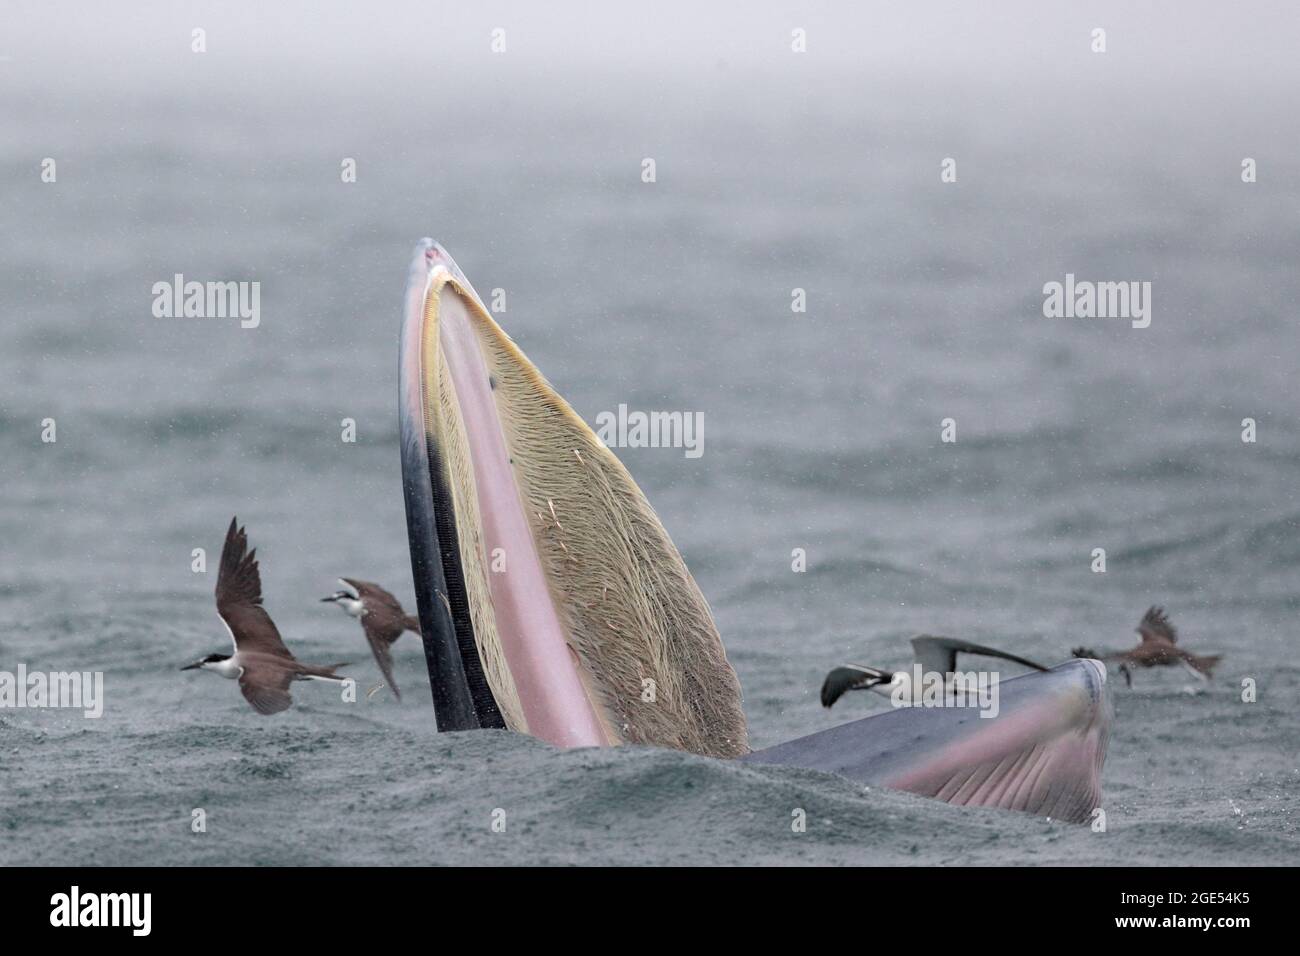 Bryde's Whale (Balaenoptera edeni), with Bridled Terns (Onychoprion anaethetus), Mirs Bay, Hong Kong, China  (also known as “Eden’s Whale) August 2021 Stock Photo